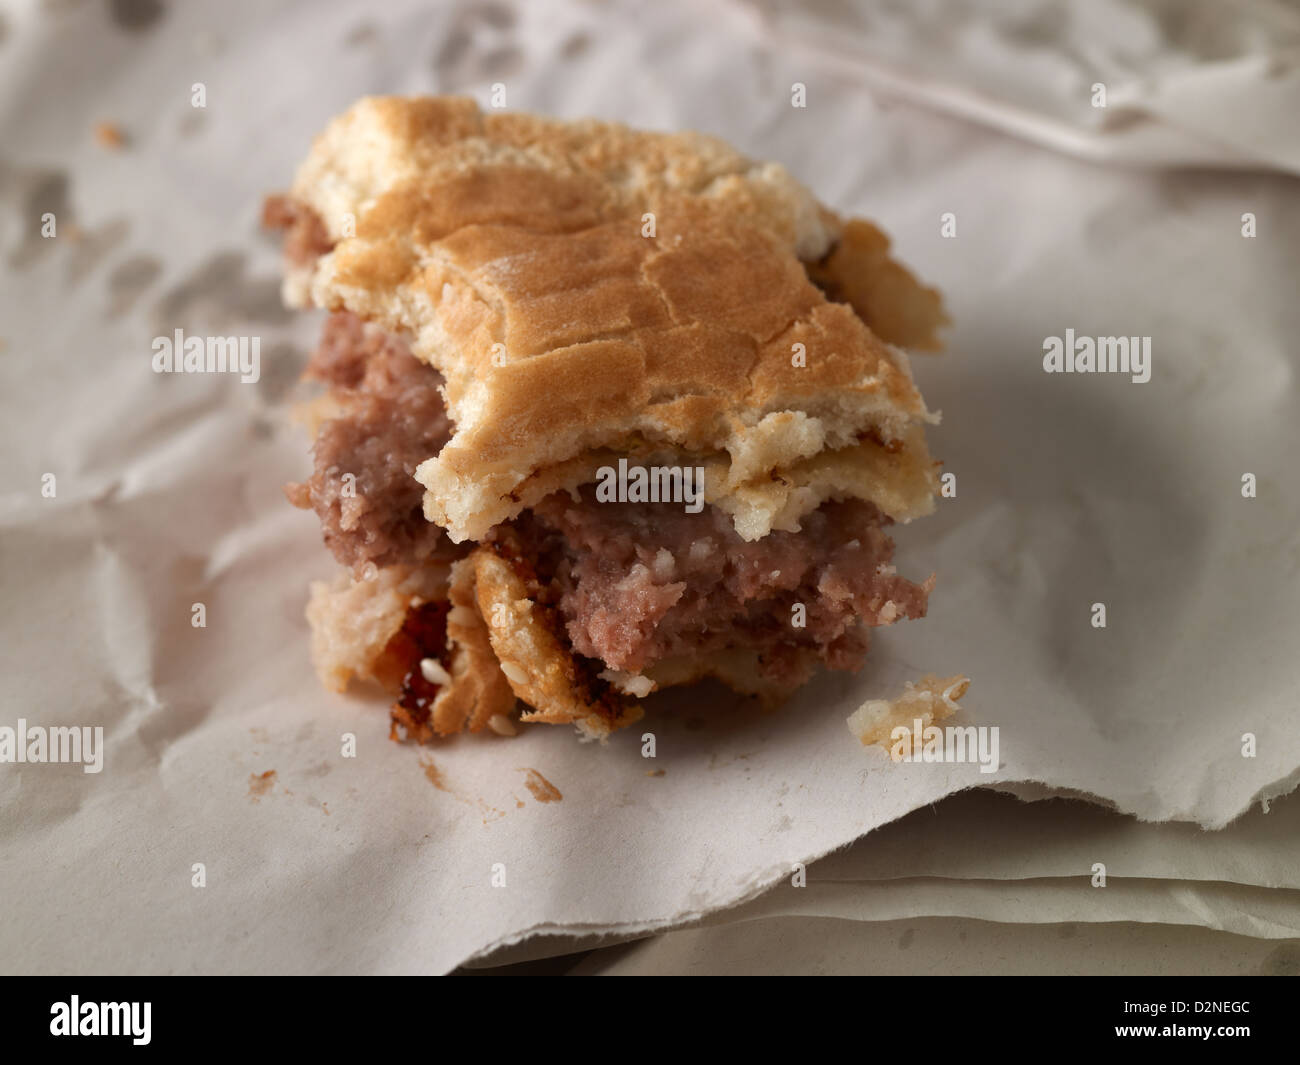 hamburger, meat, beef, horse, mad cow, cattle, cow, horse meat, bap, bread, butcher, victualler, burger,take away,fast food, Stock Photo